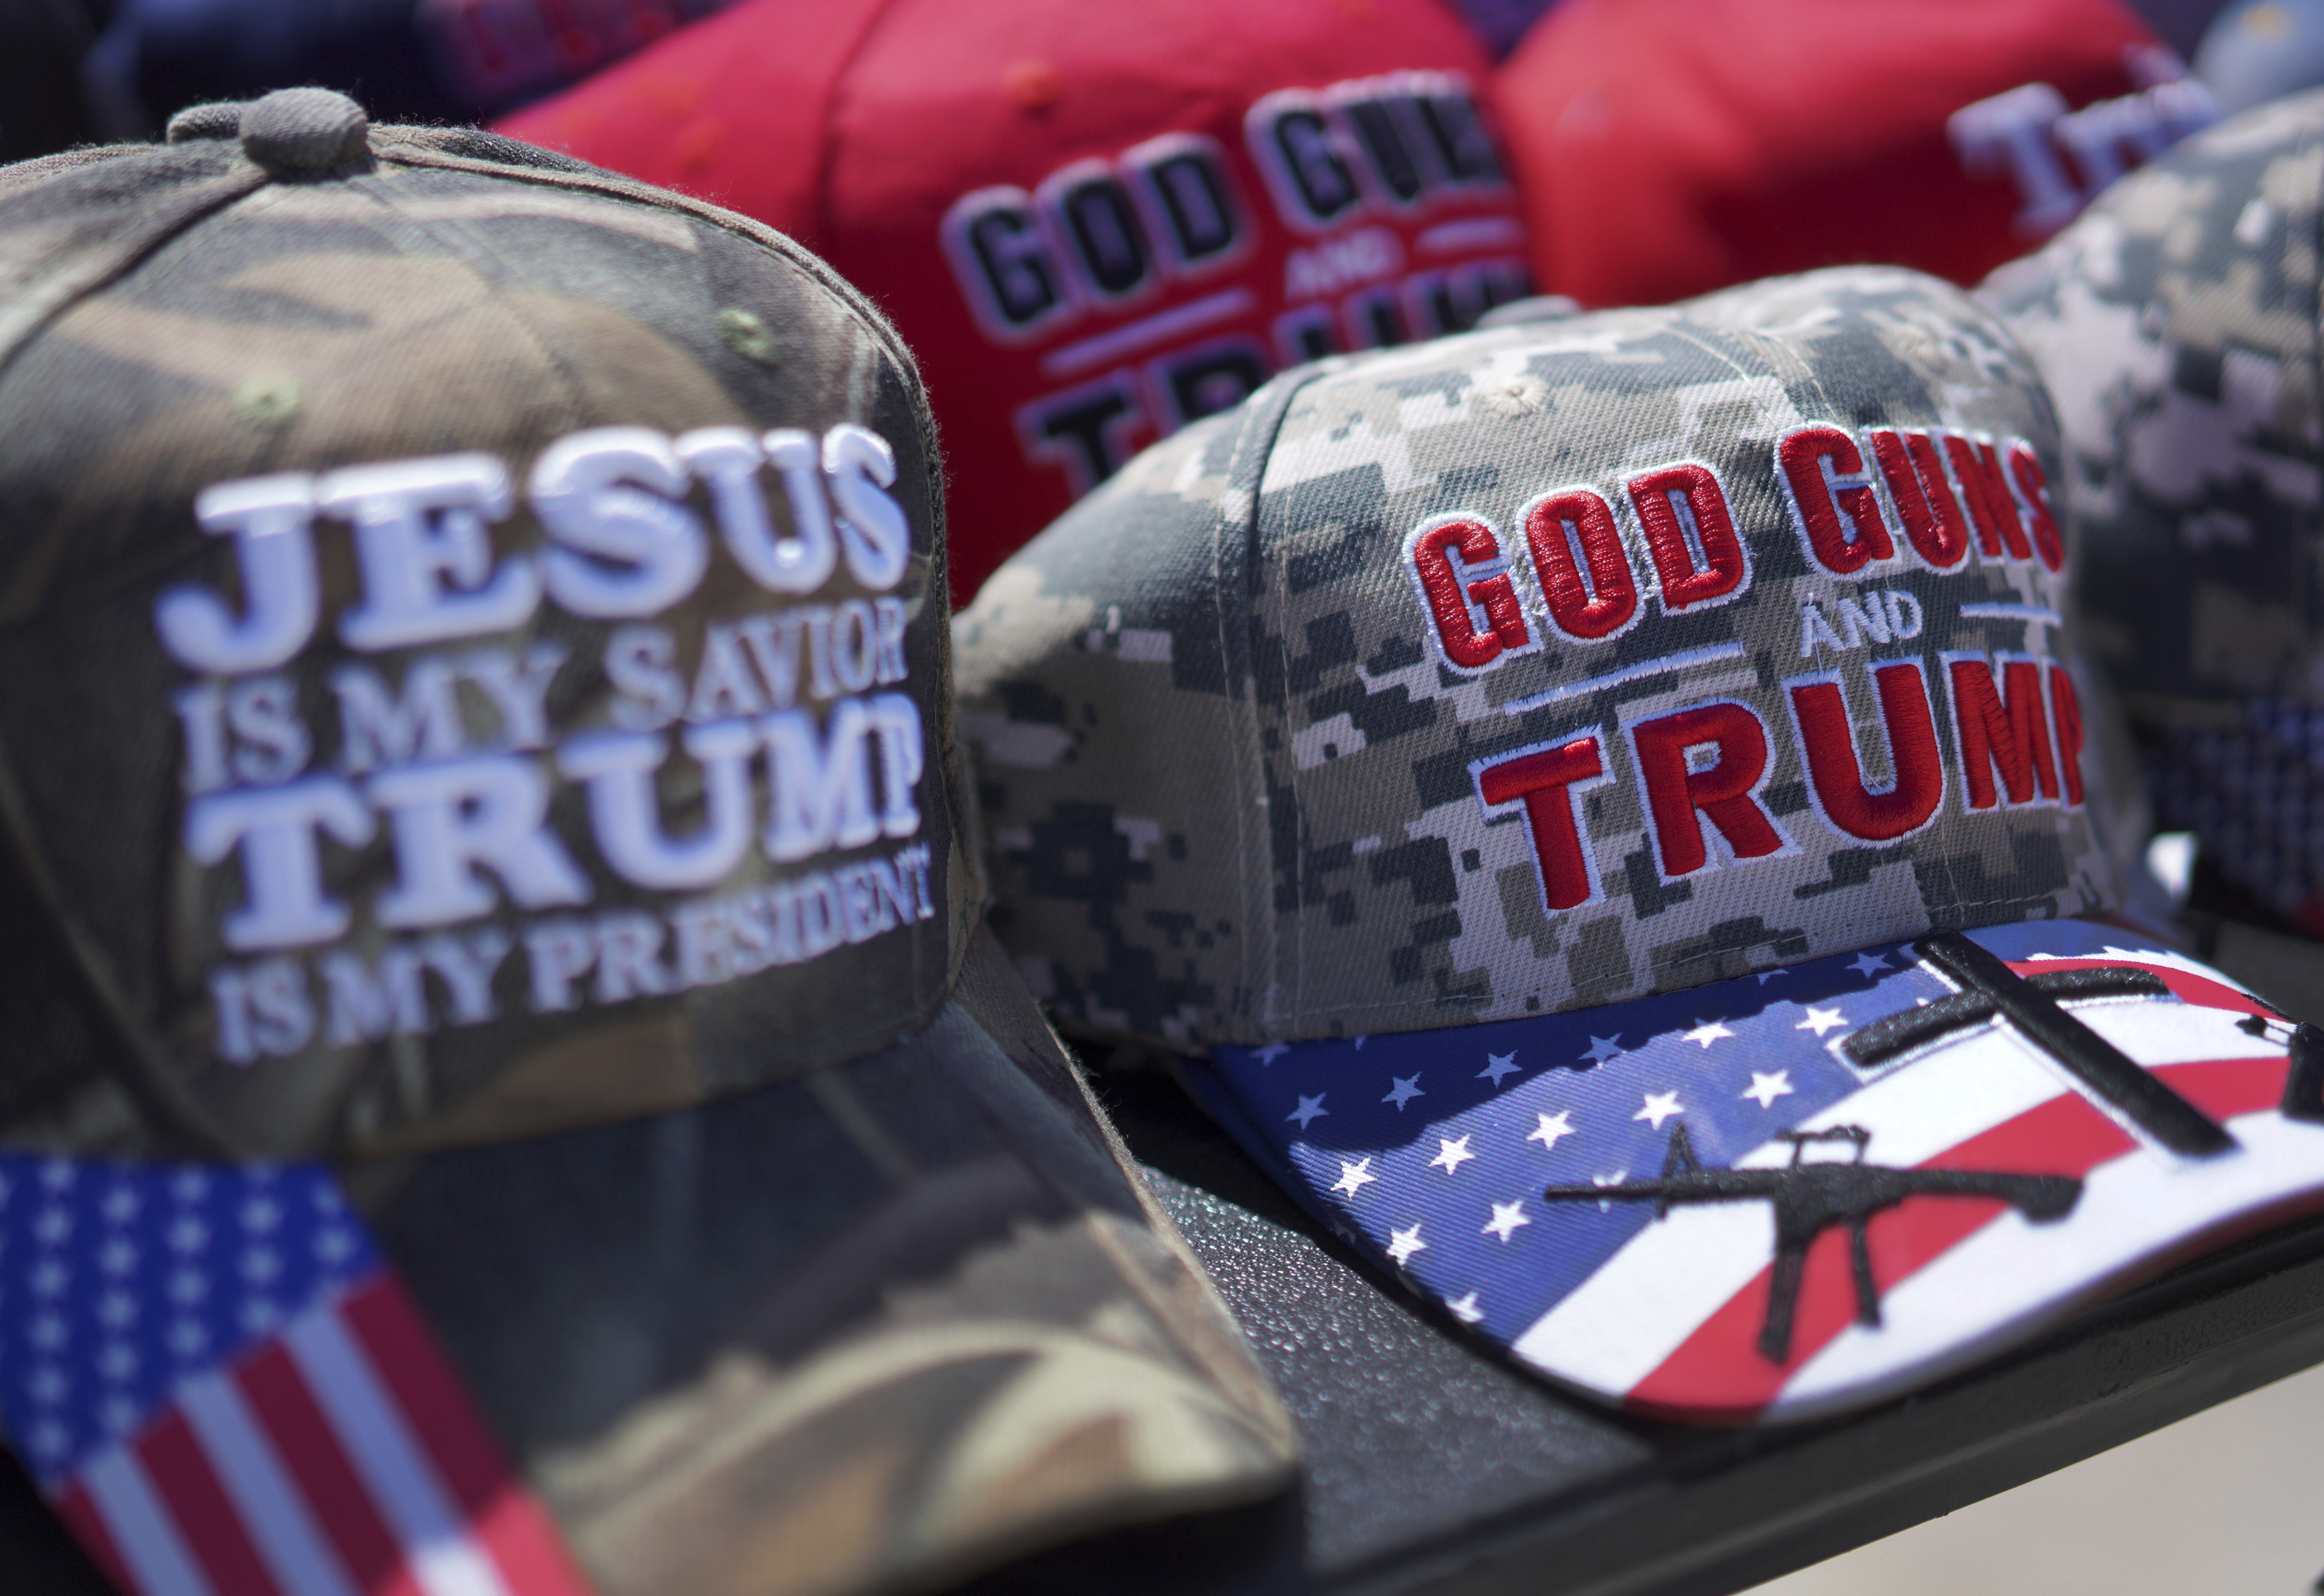 Hats reading, "God, Guns and Trump," and "Jesus is my savior, Trump is my president," are sold at a campaign rally for former president Donald Trump in Vandalia, Ohio, on Saturday, March 16, 2024. Trump, who is coasting into a third Republican presidential nomination, continues to draw strong support from evangelicals and other conservative Christians. (AP Photo/Jessie Wardarski)